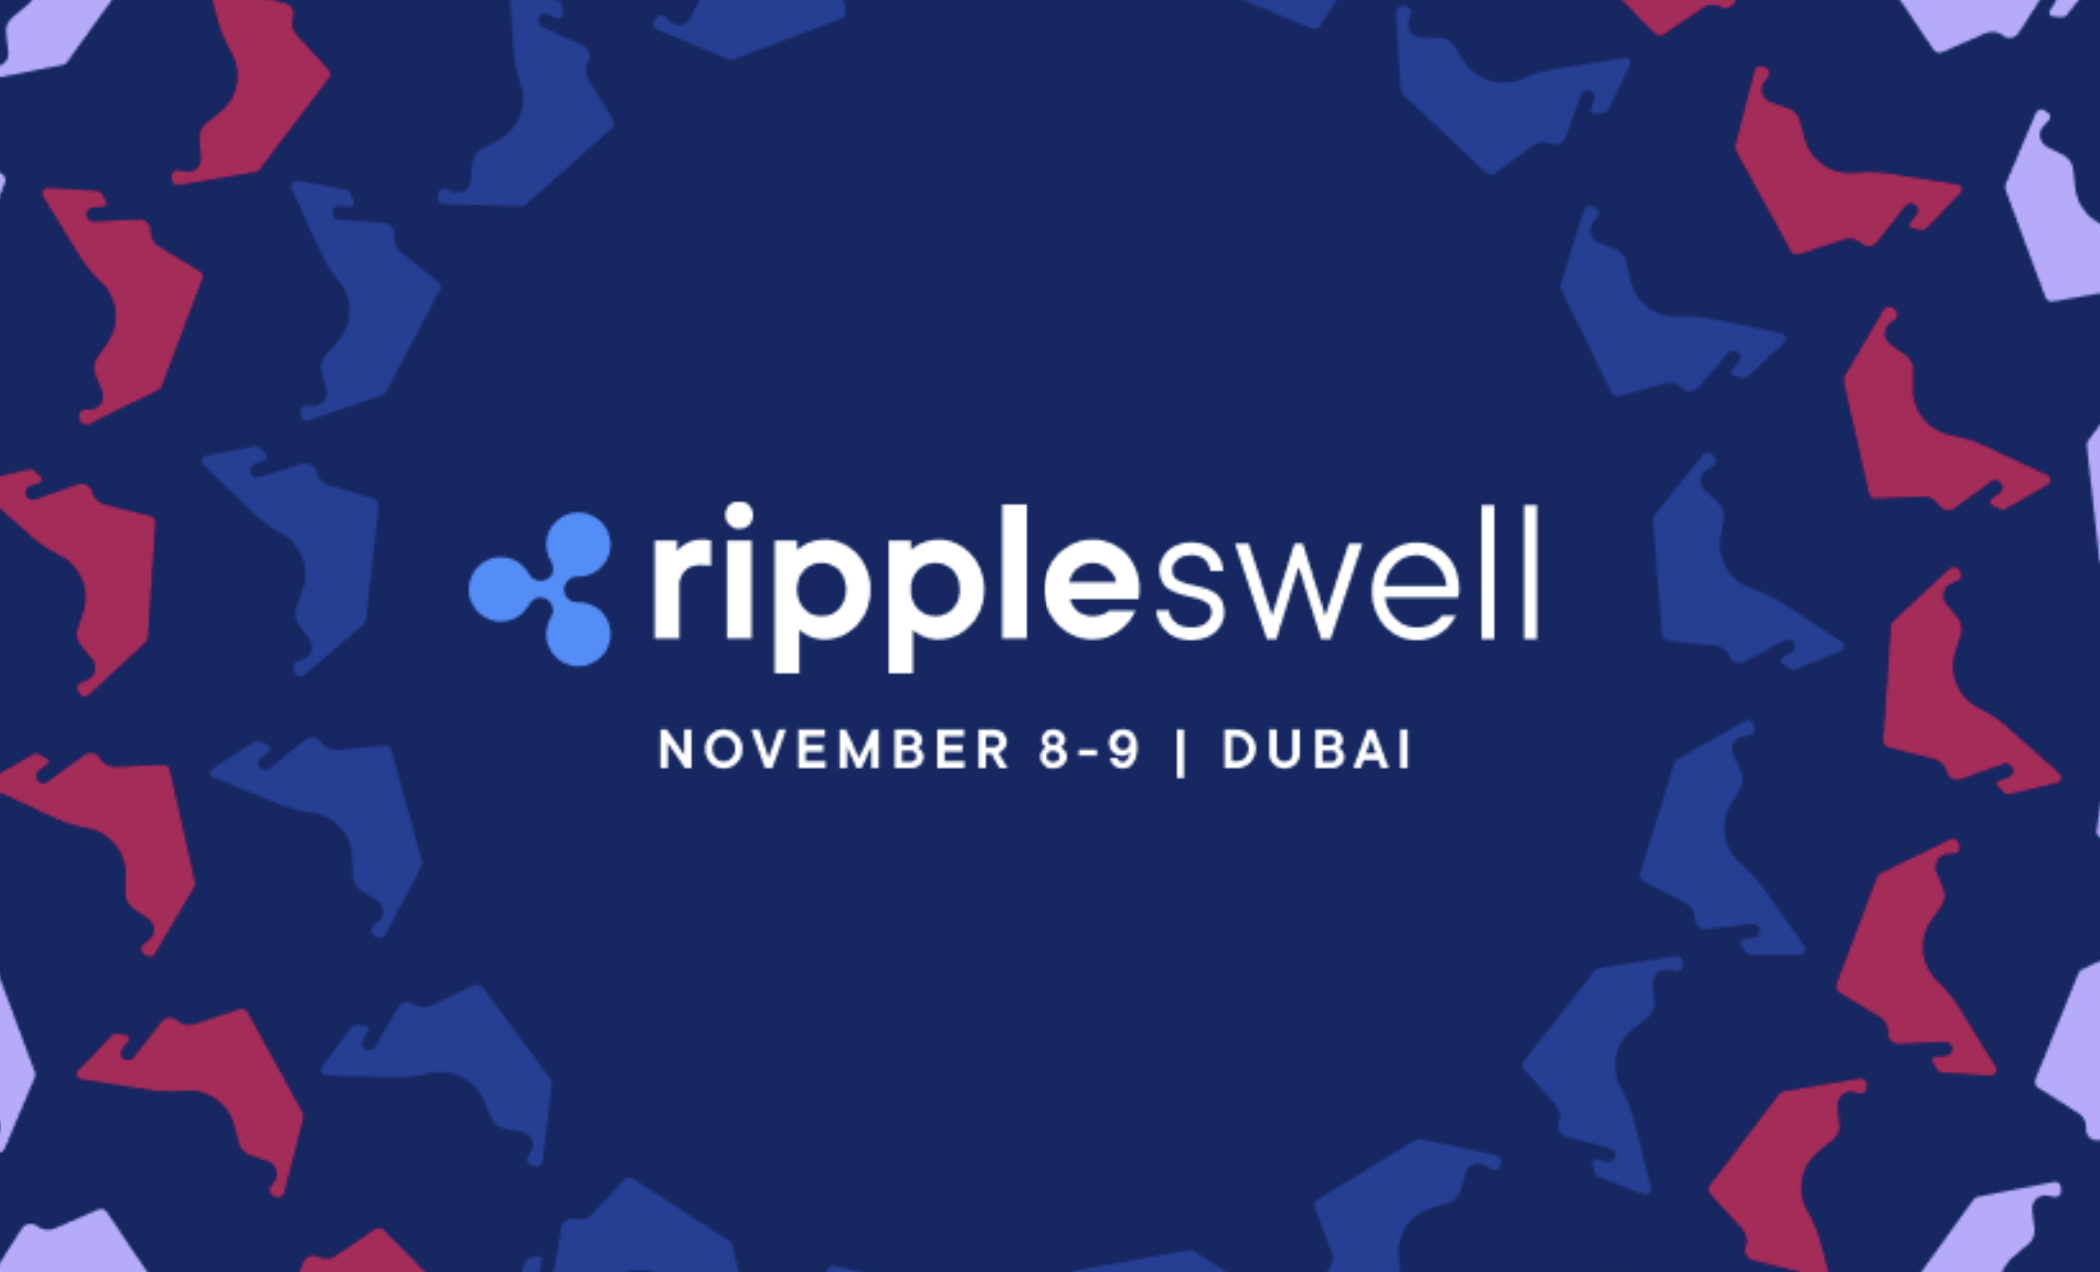 XRP Price Is about to Repeat the Surge Due to Swell Conference, Traders Say